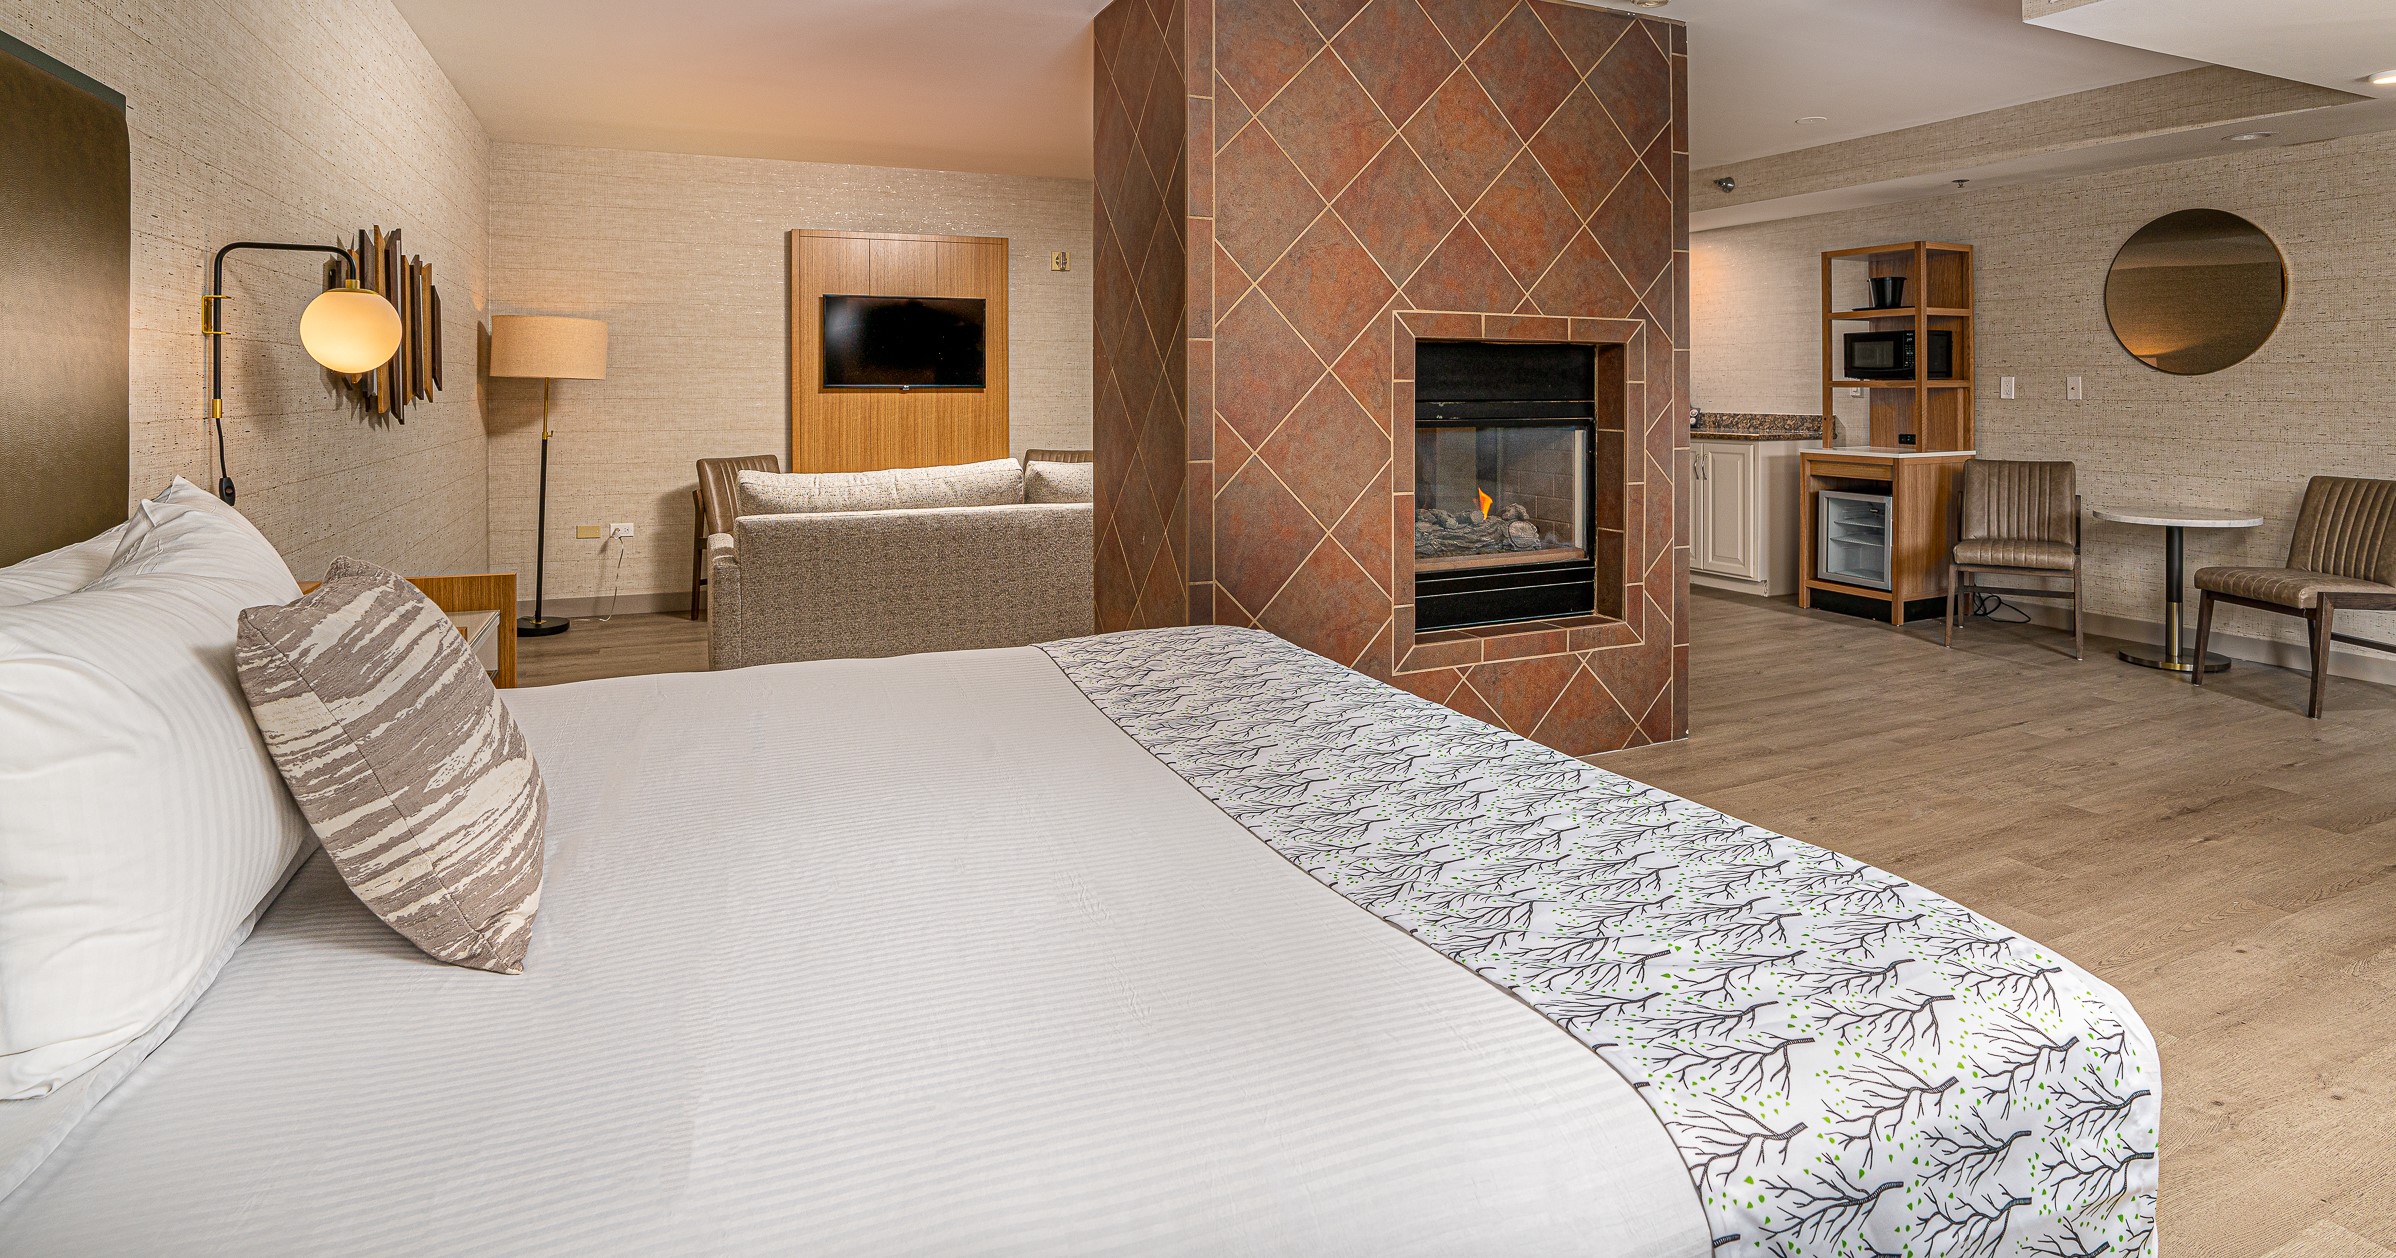 A king sized bed is neatly made in a beautifully decorated neutral hotel room with a brick fireplace.